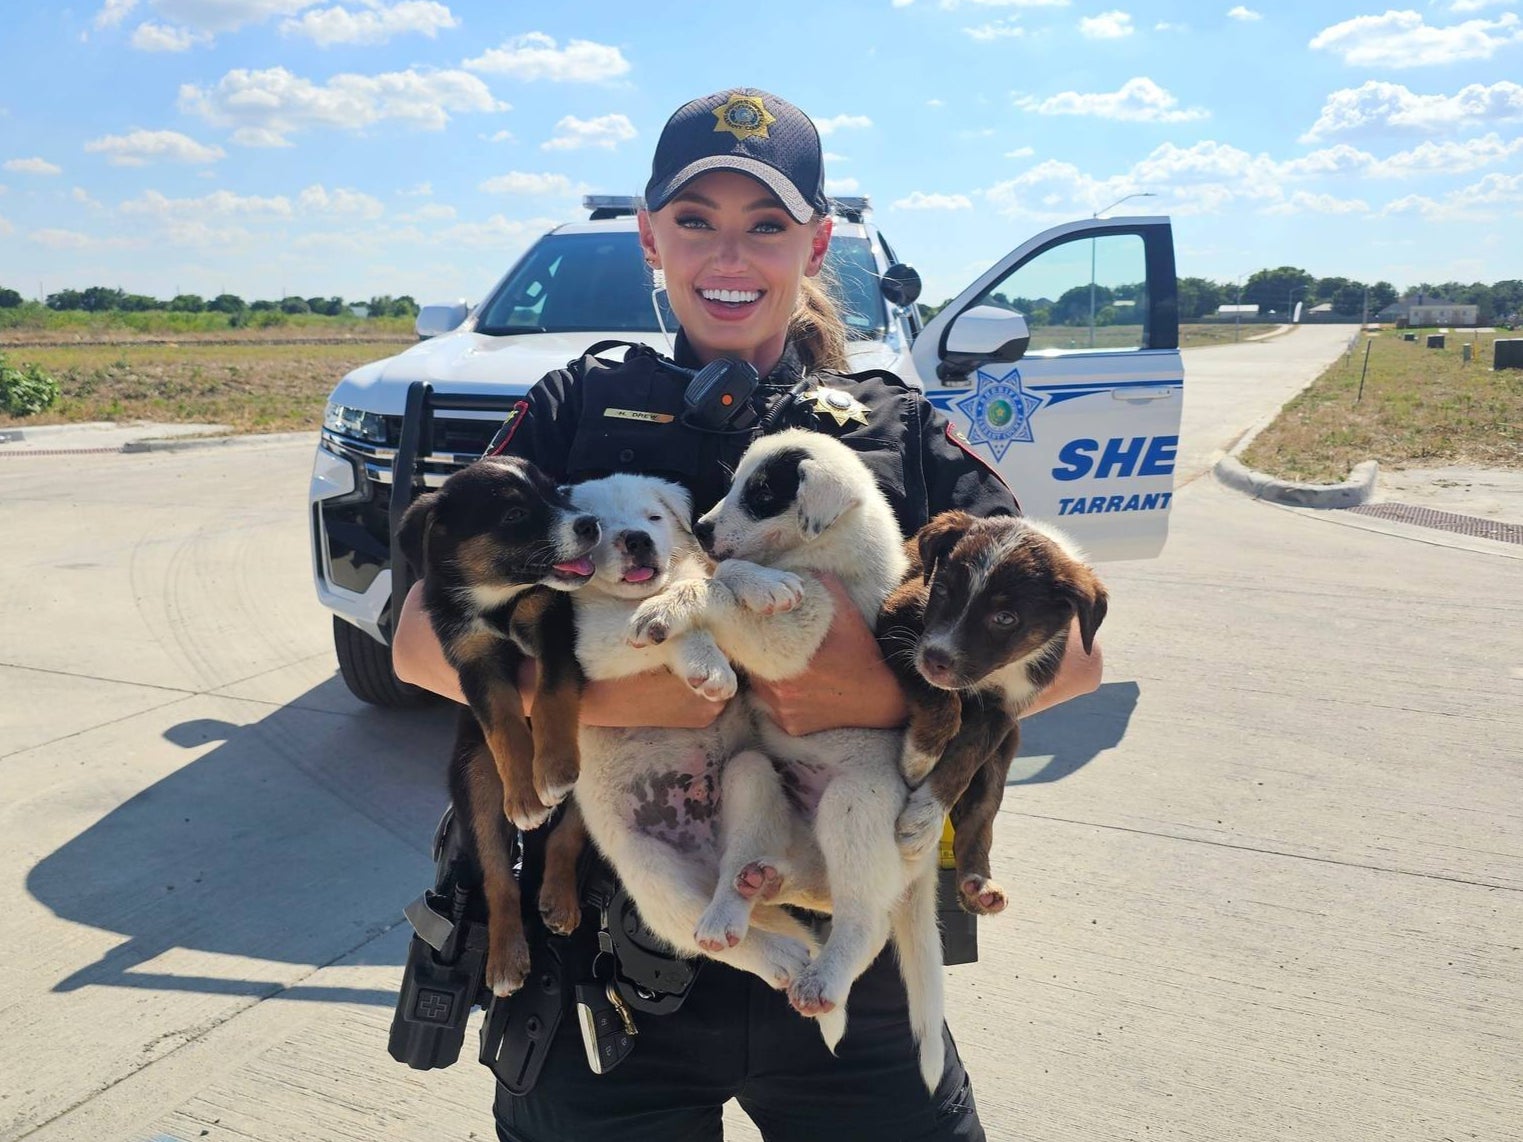 A member of the Tarrant County Sheriff’s Office pictured holding several puppies who were abandoned in a heat wave with no water. All eight puppies have since been adopted